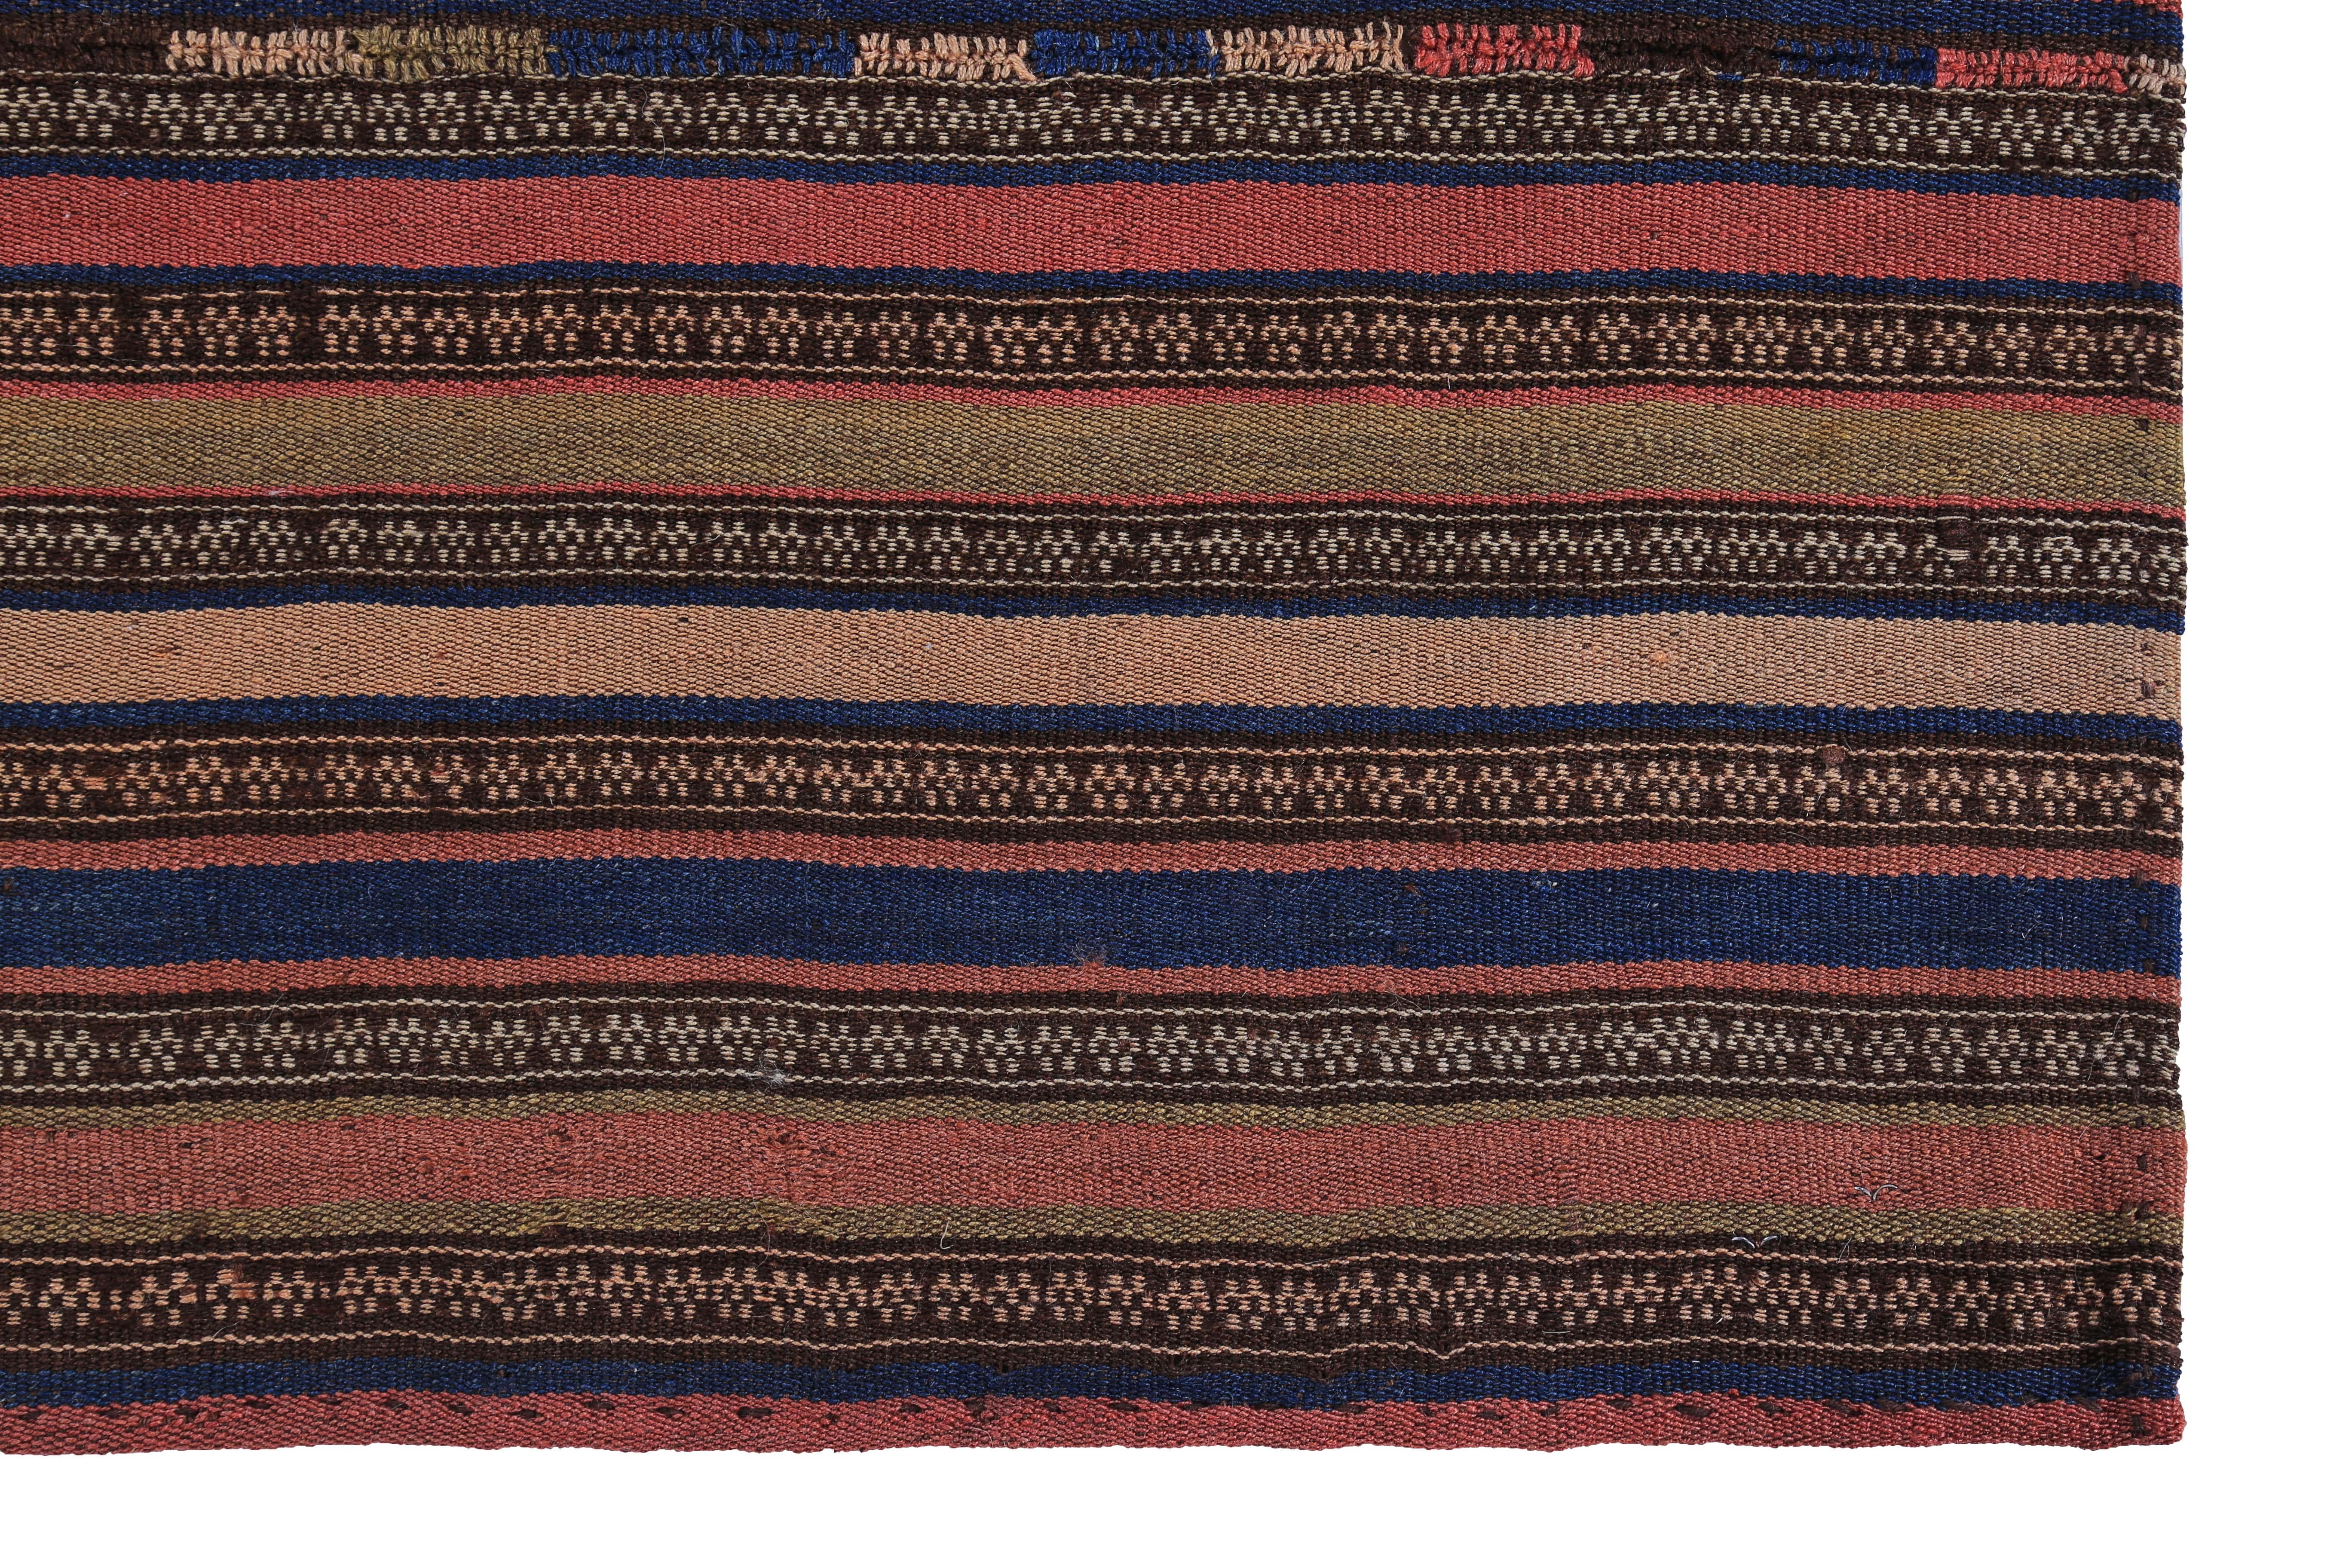 Hand-Woven Modern Turkish Kilim Rug with Red, Blue, Brown and Orange Stripes For Sale